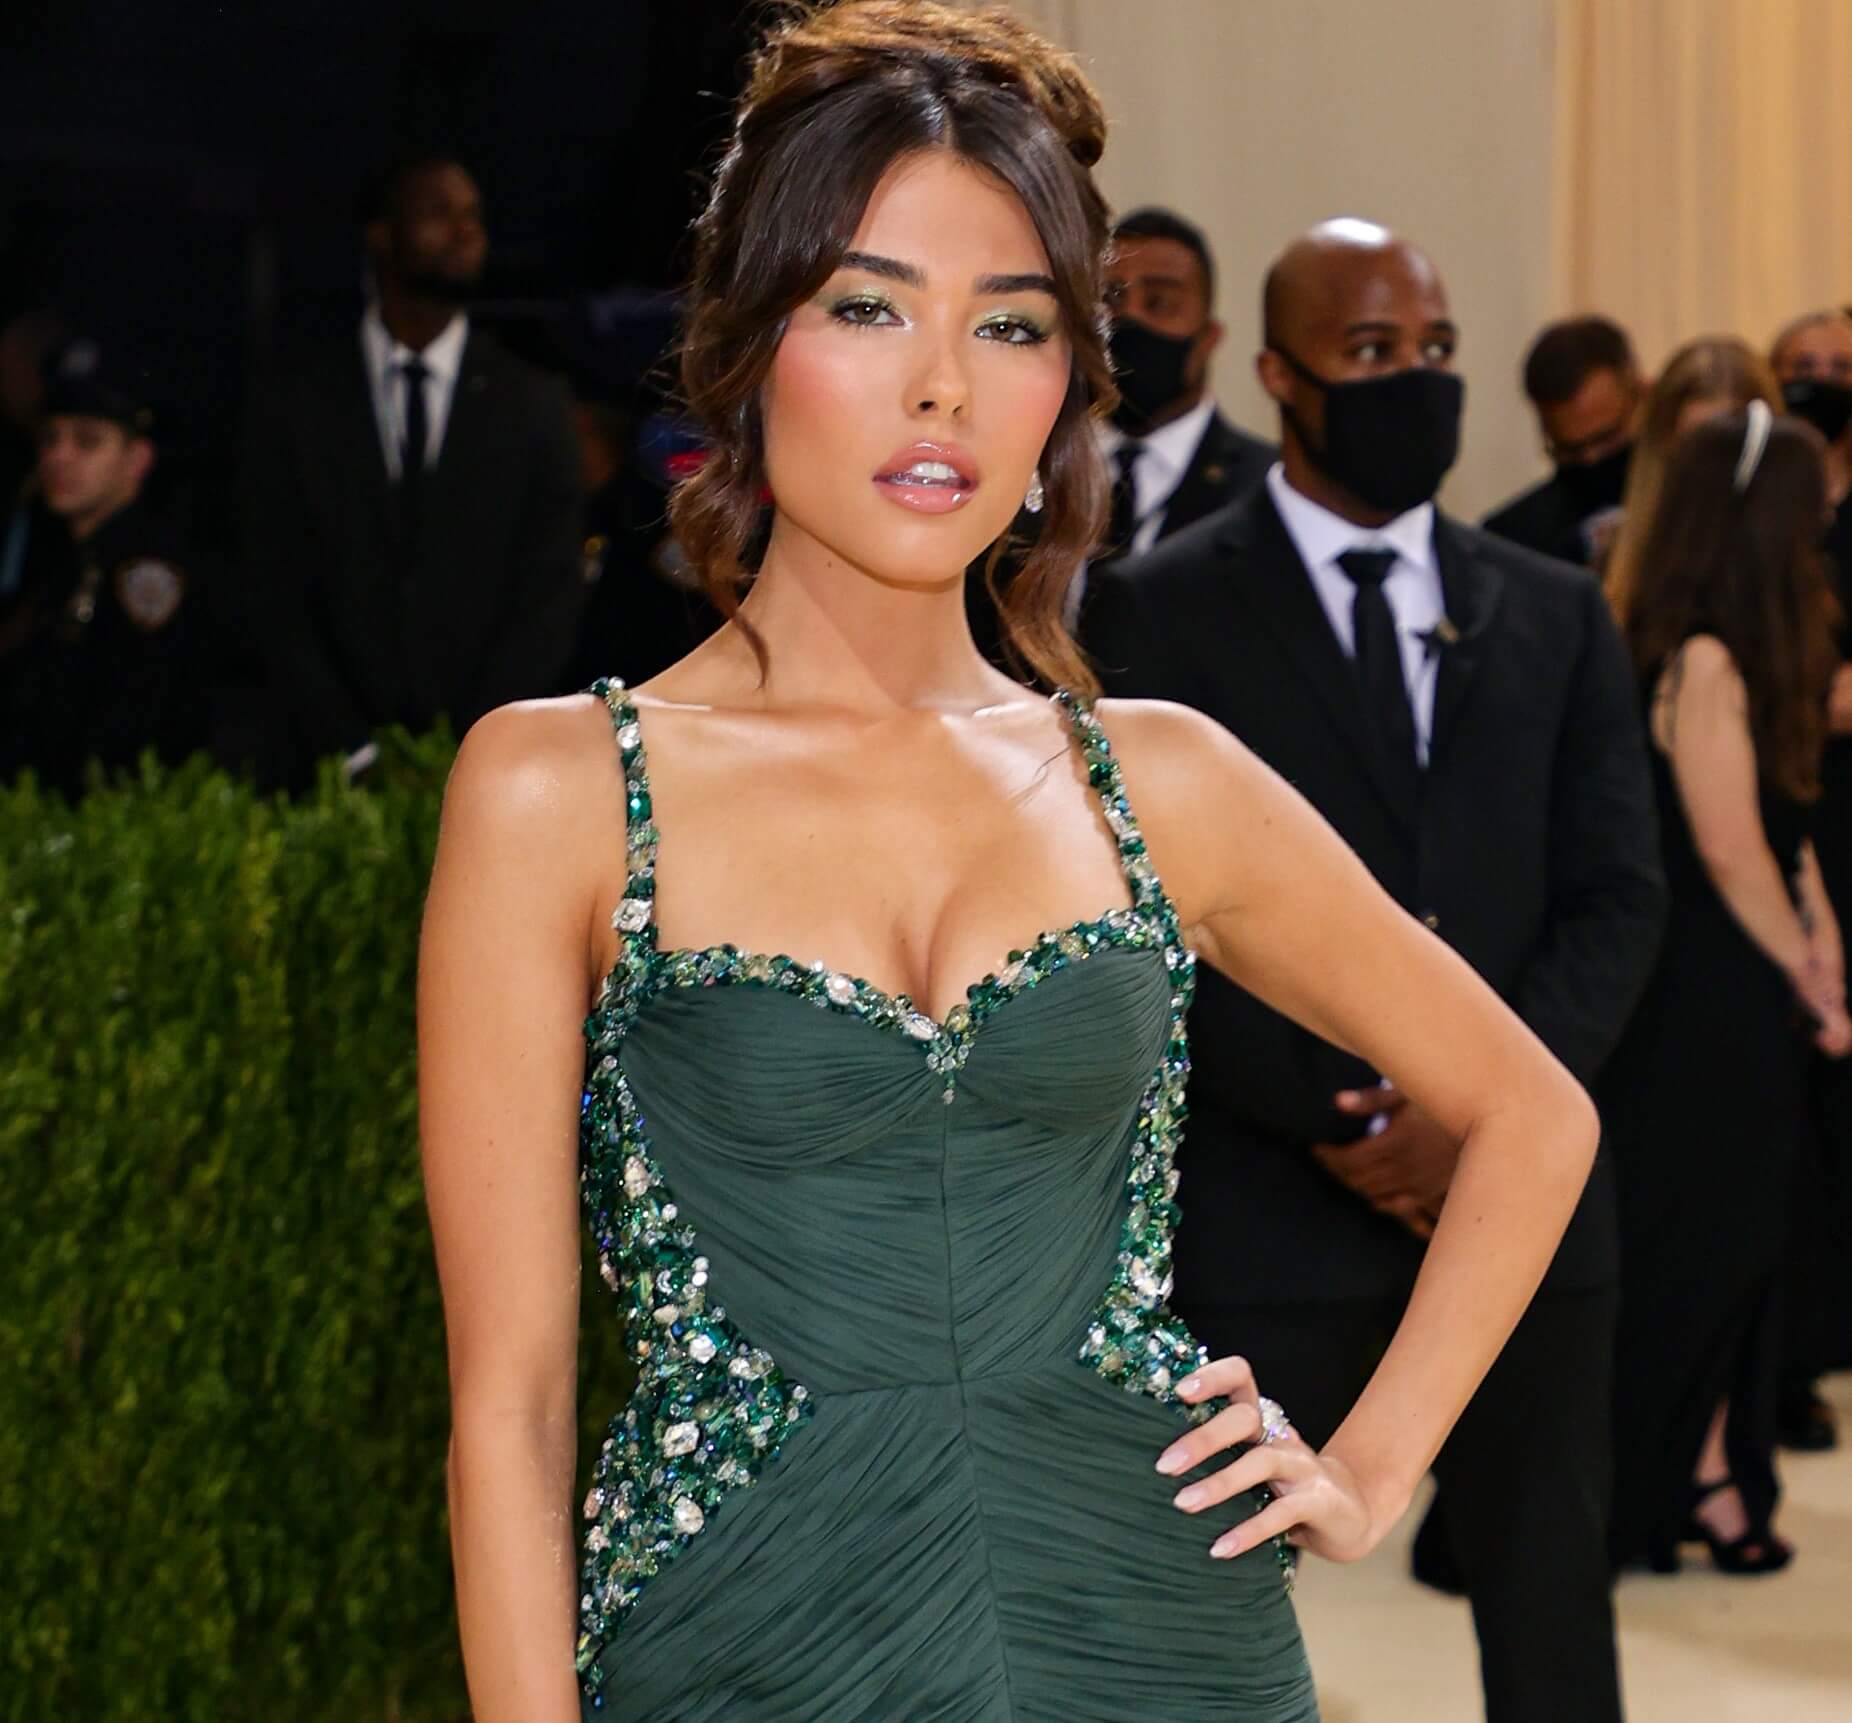 Madison Beer in a green dress